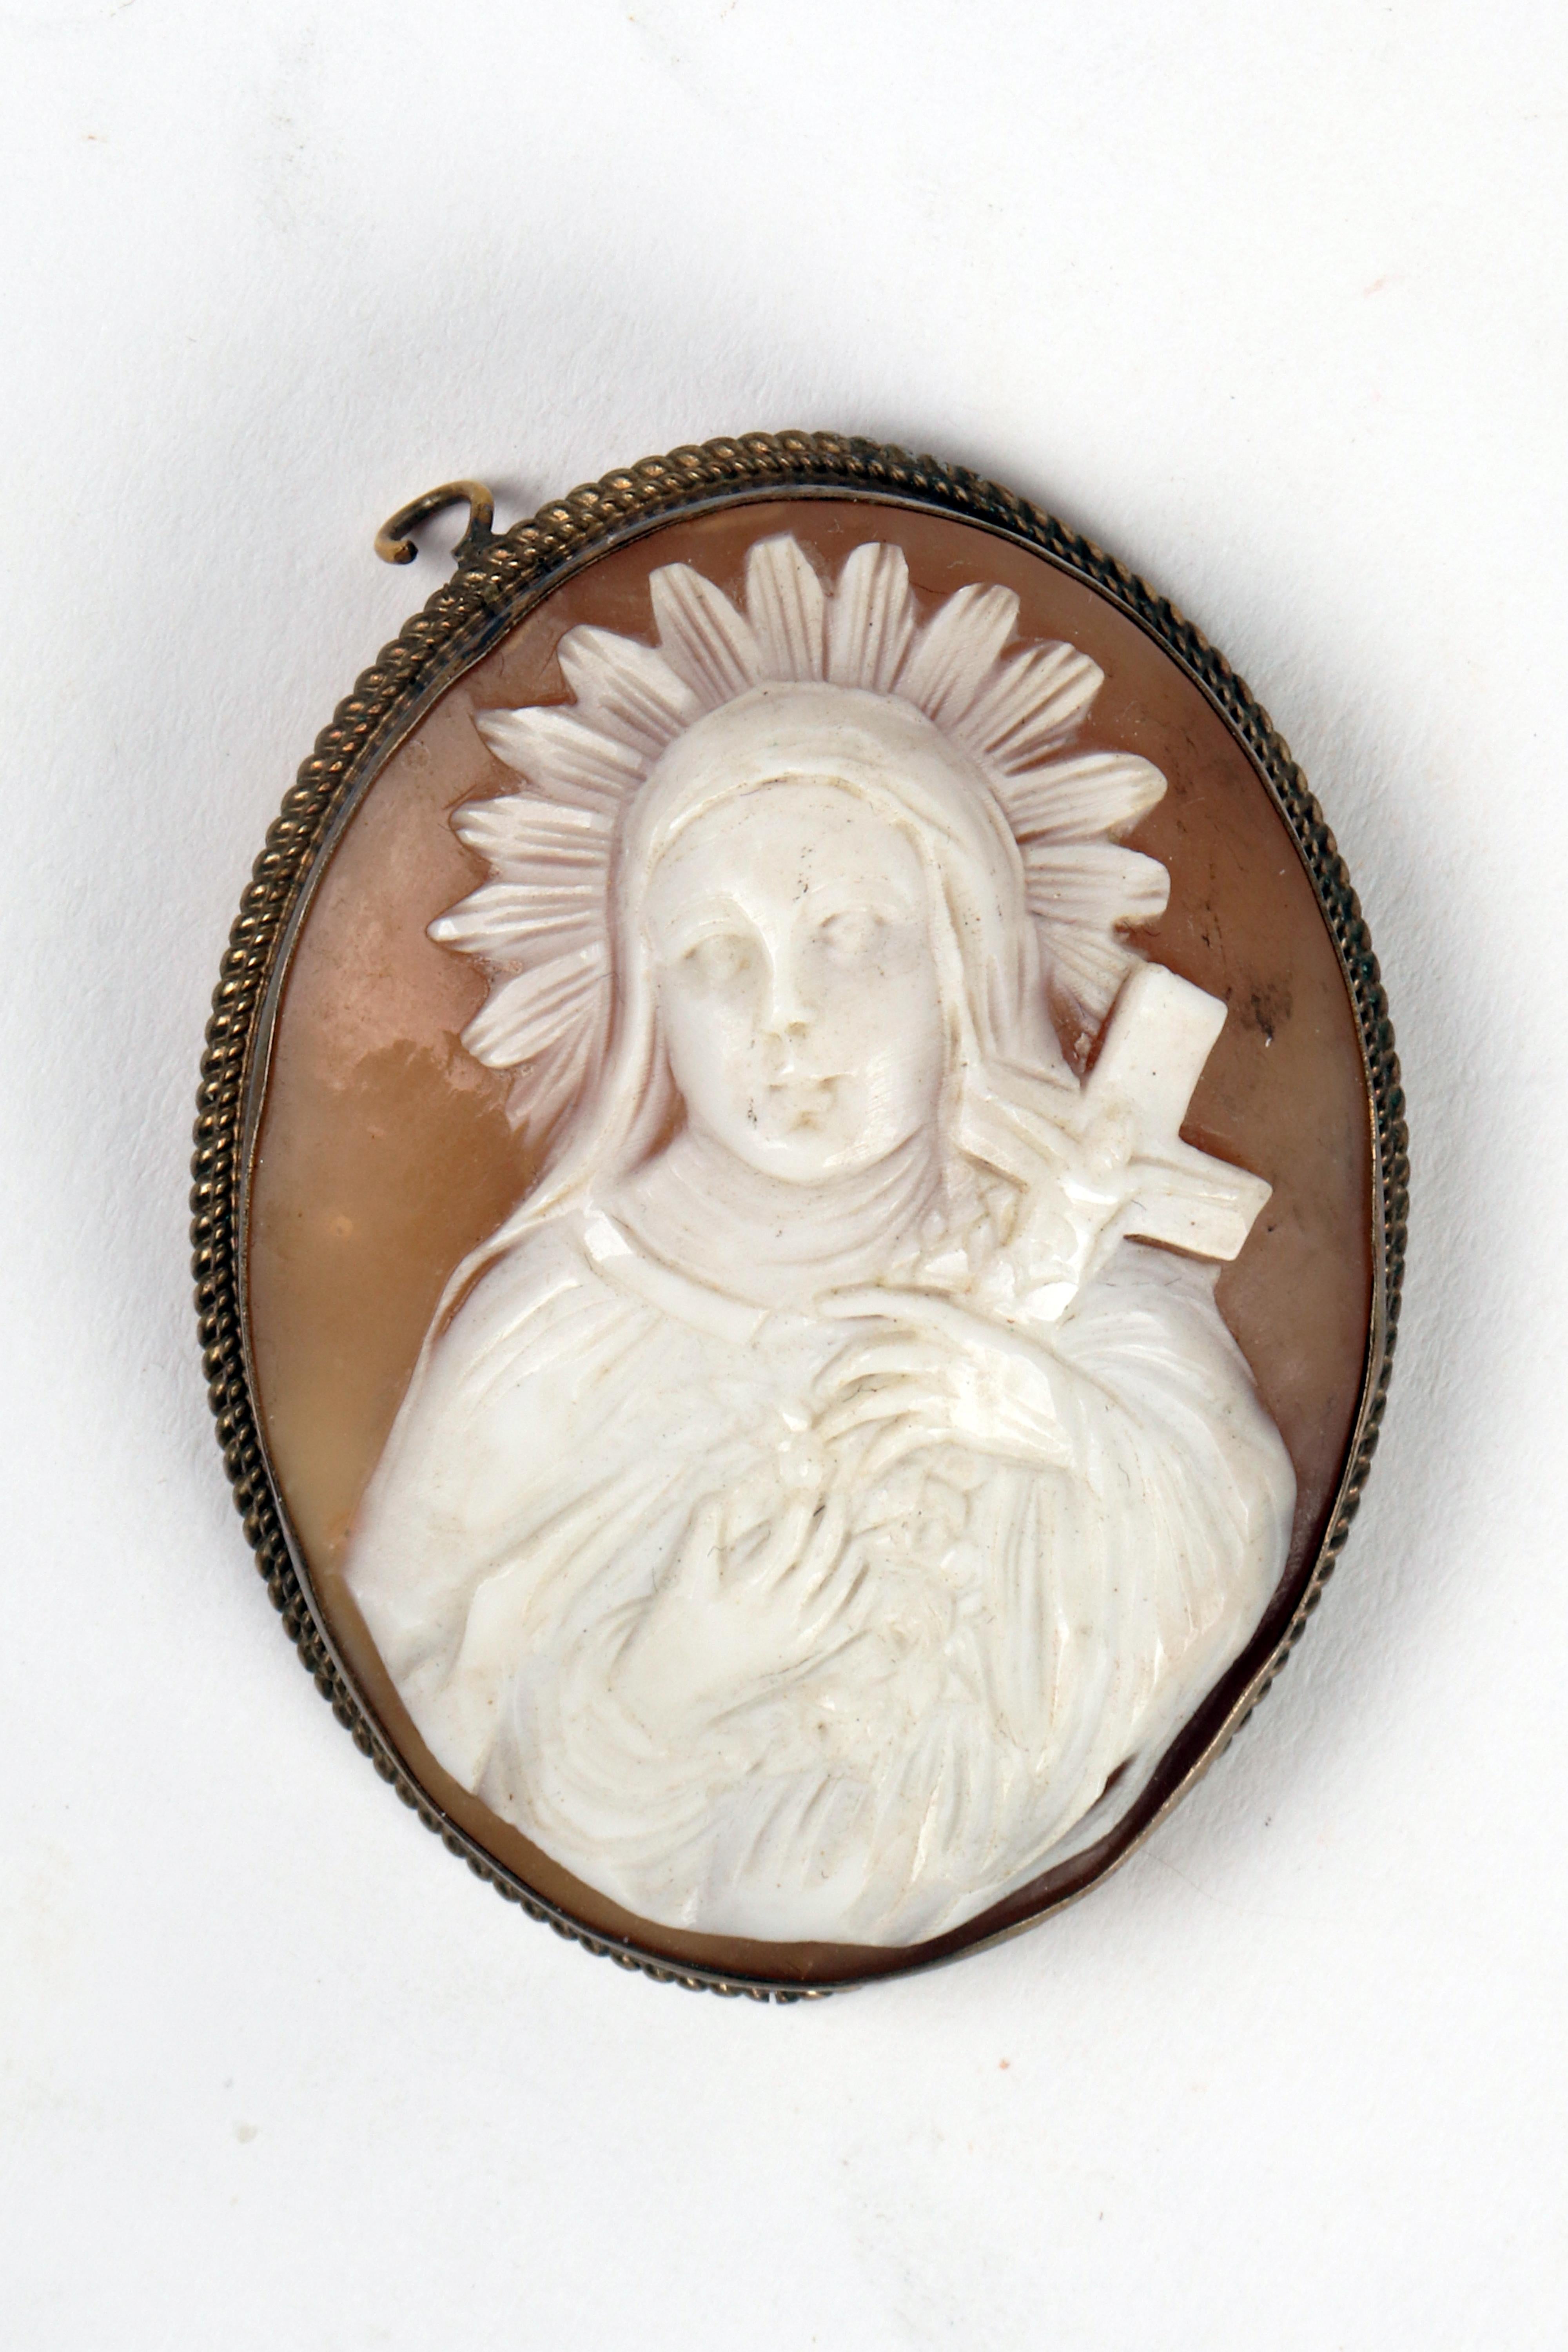 Oval shell cameo, mounted in golden metal depicting a figure of Santa holding a cross. The back has traces of attachments to a double chain, for use as a choker. England, late 19th century.